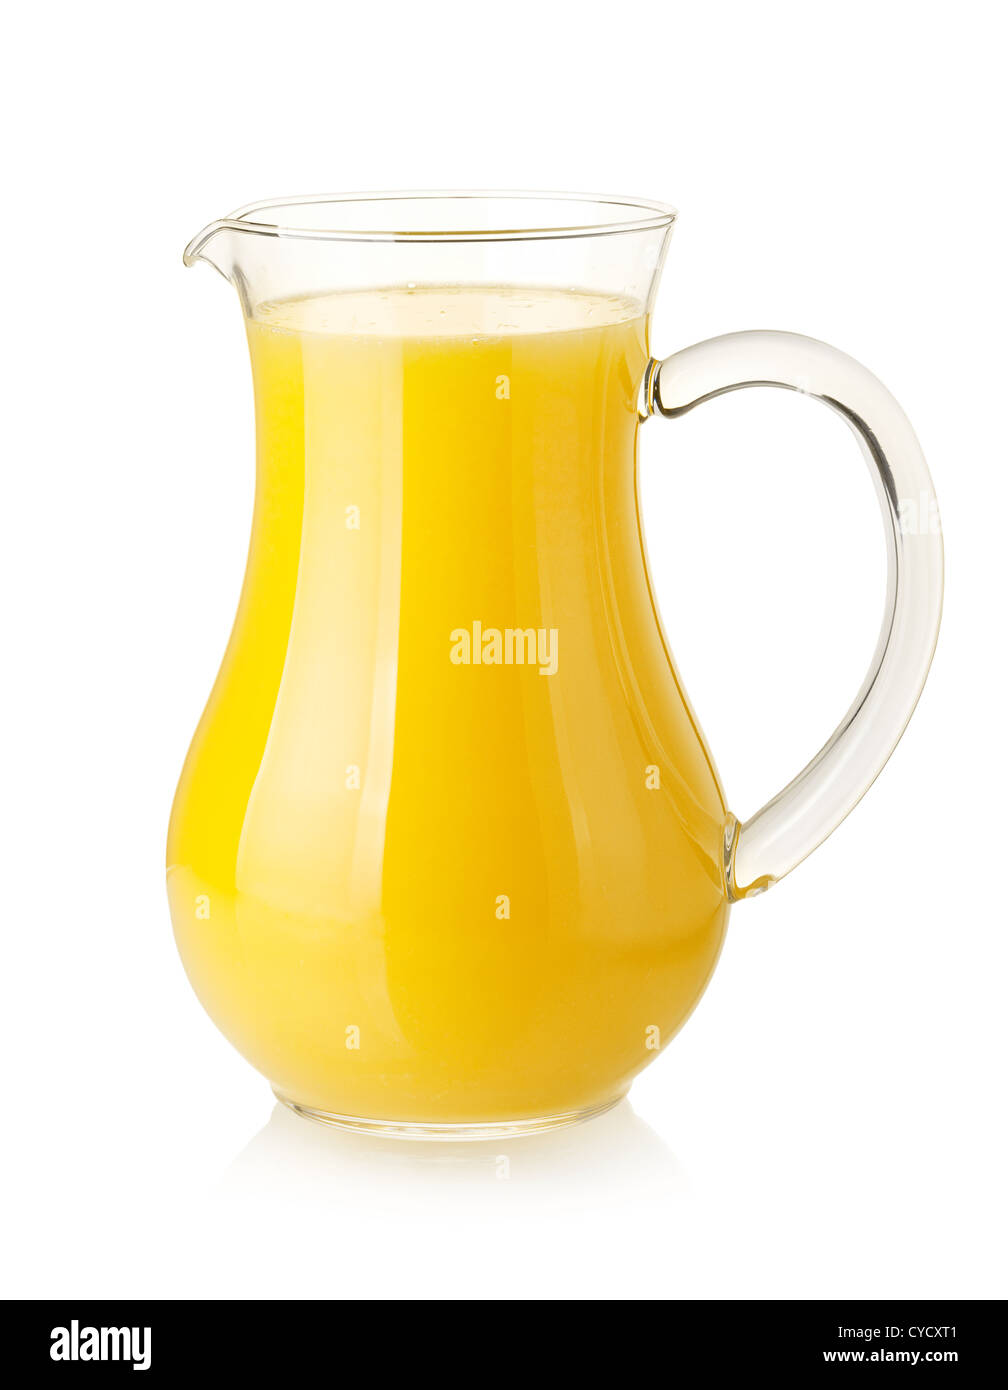 https://c8.alamy.com/comp/CYCXT1/orange-juice-in-pitcher-isolated-on-white-background-CYCXT1.jpg